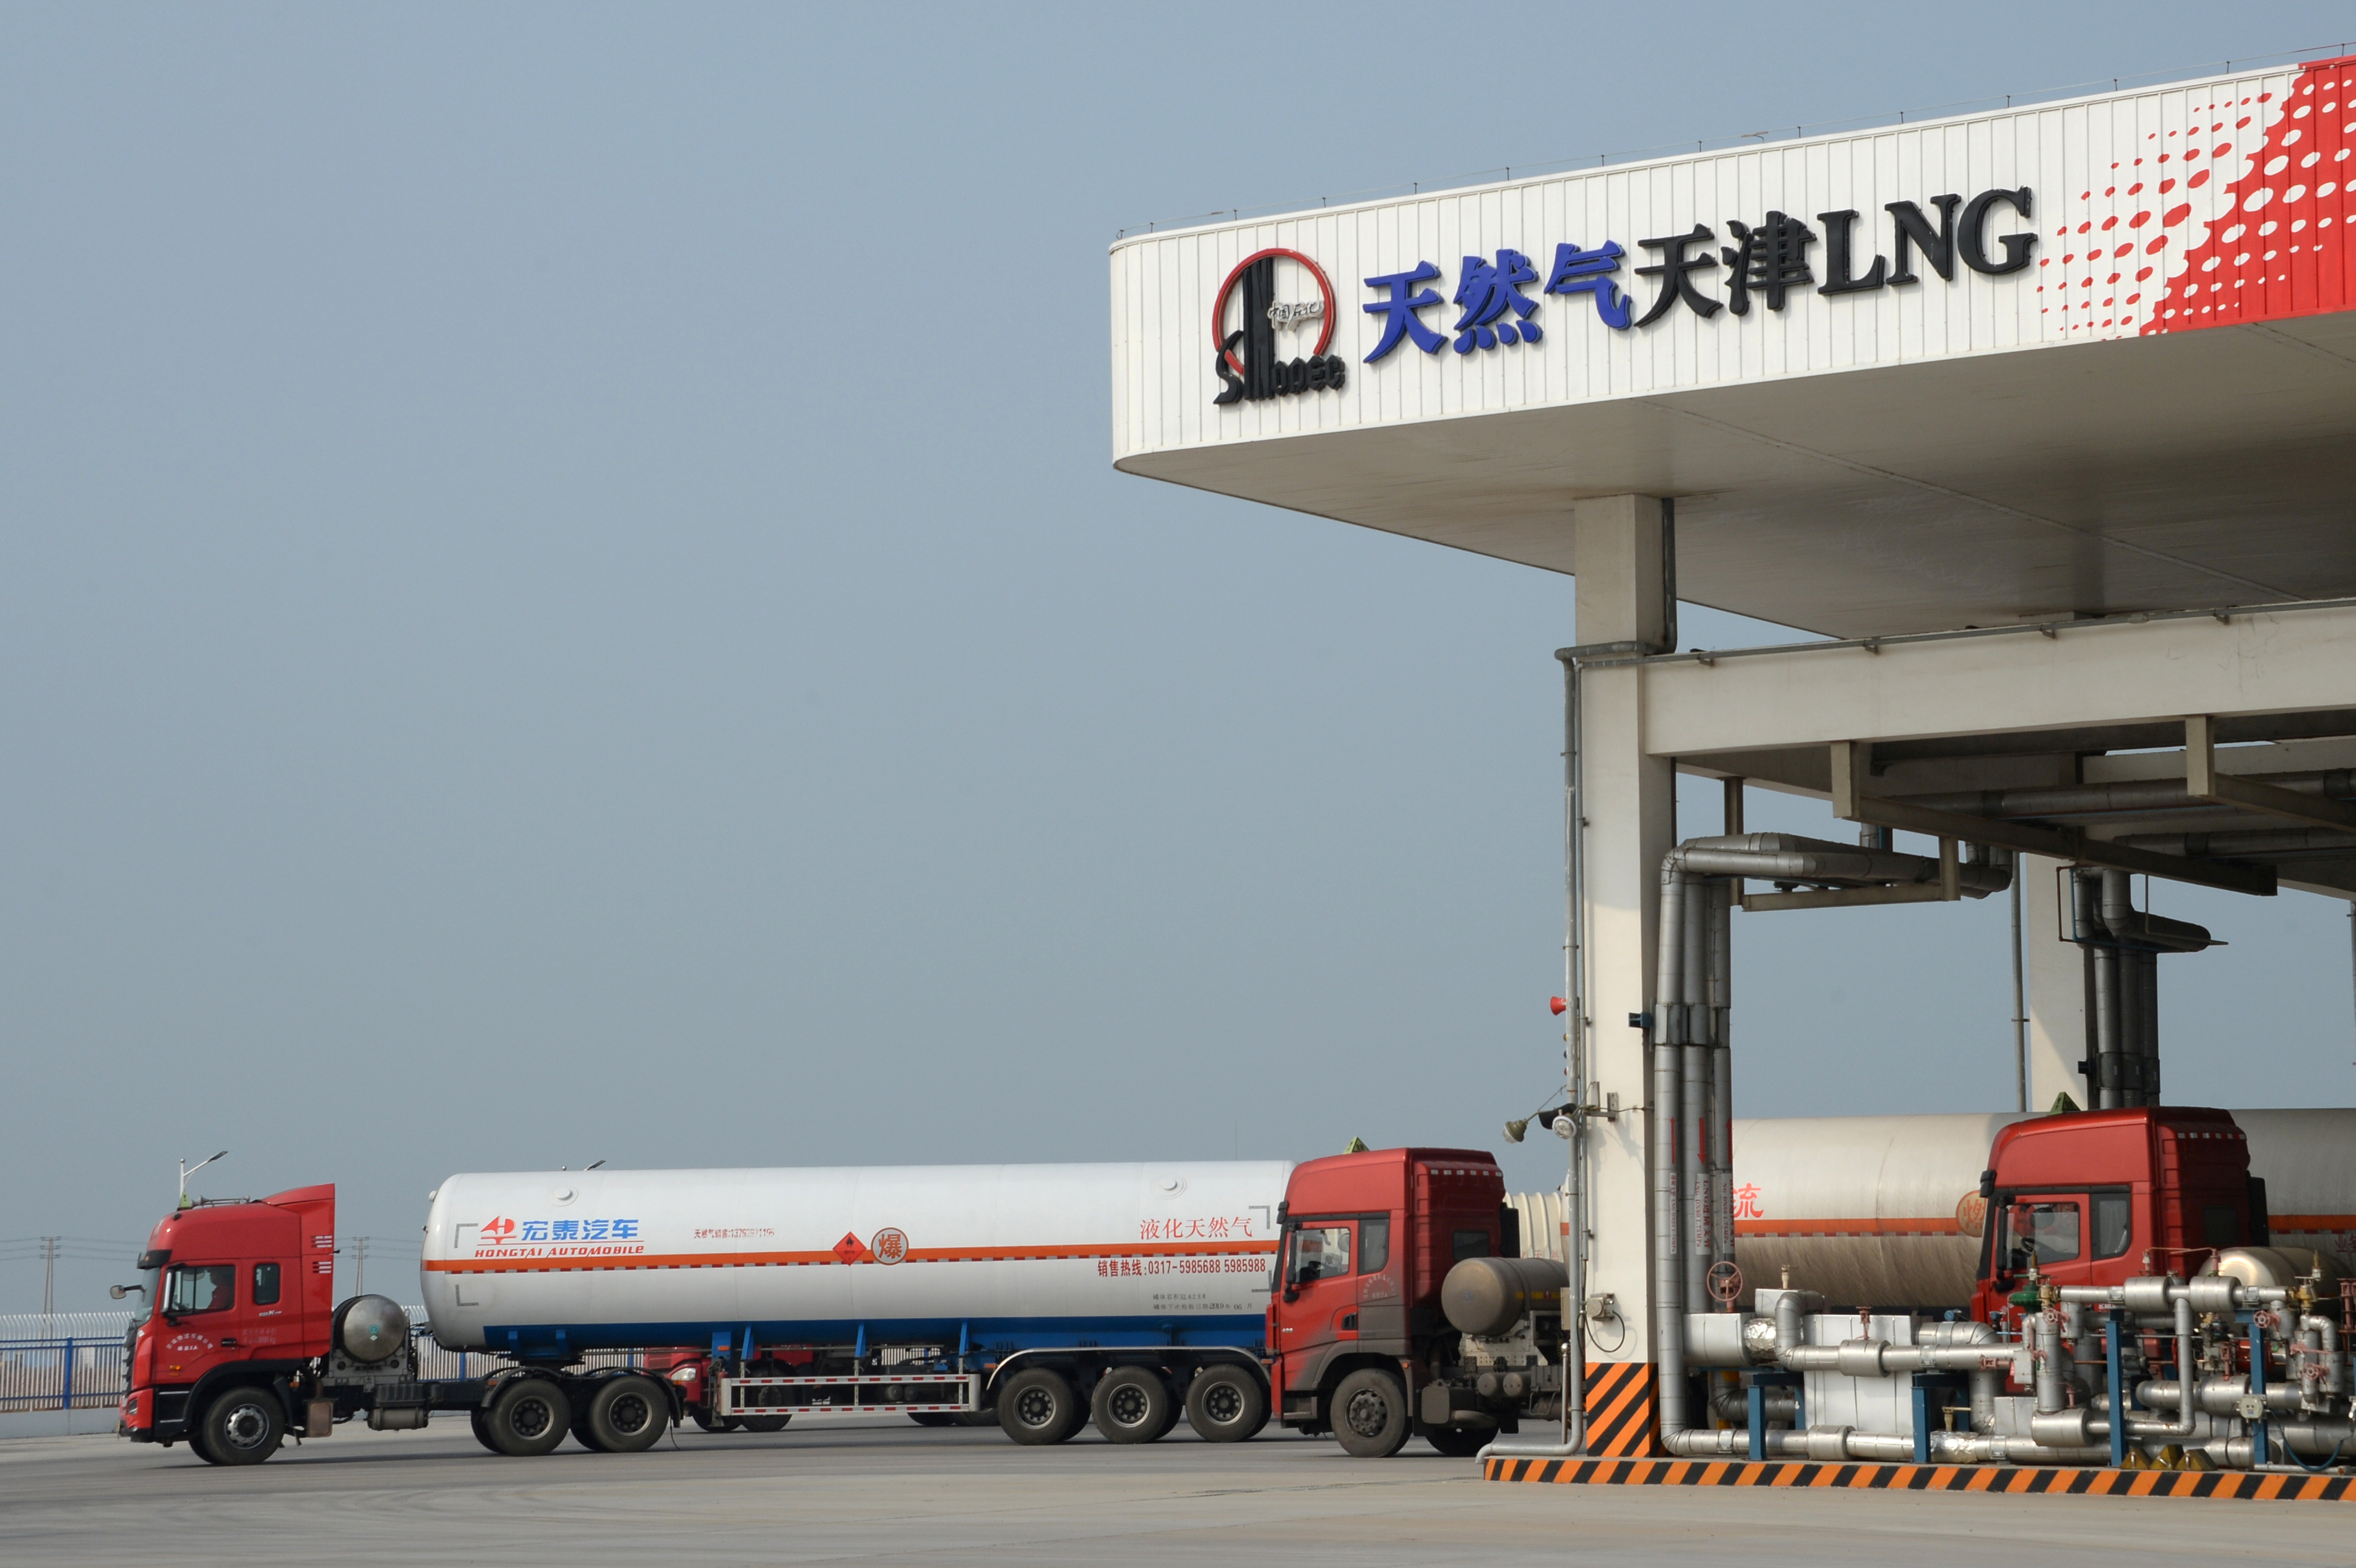 Trucks carrying liquefied natural gas (LNG) are seen at Sinopec's LNG terminal in Tianjin